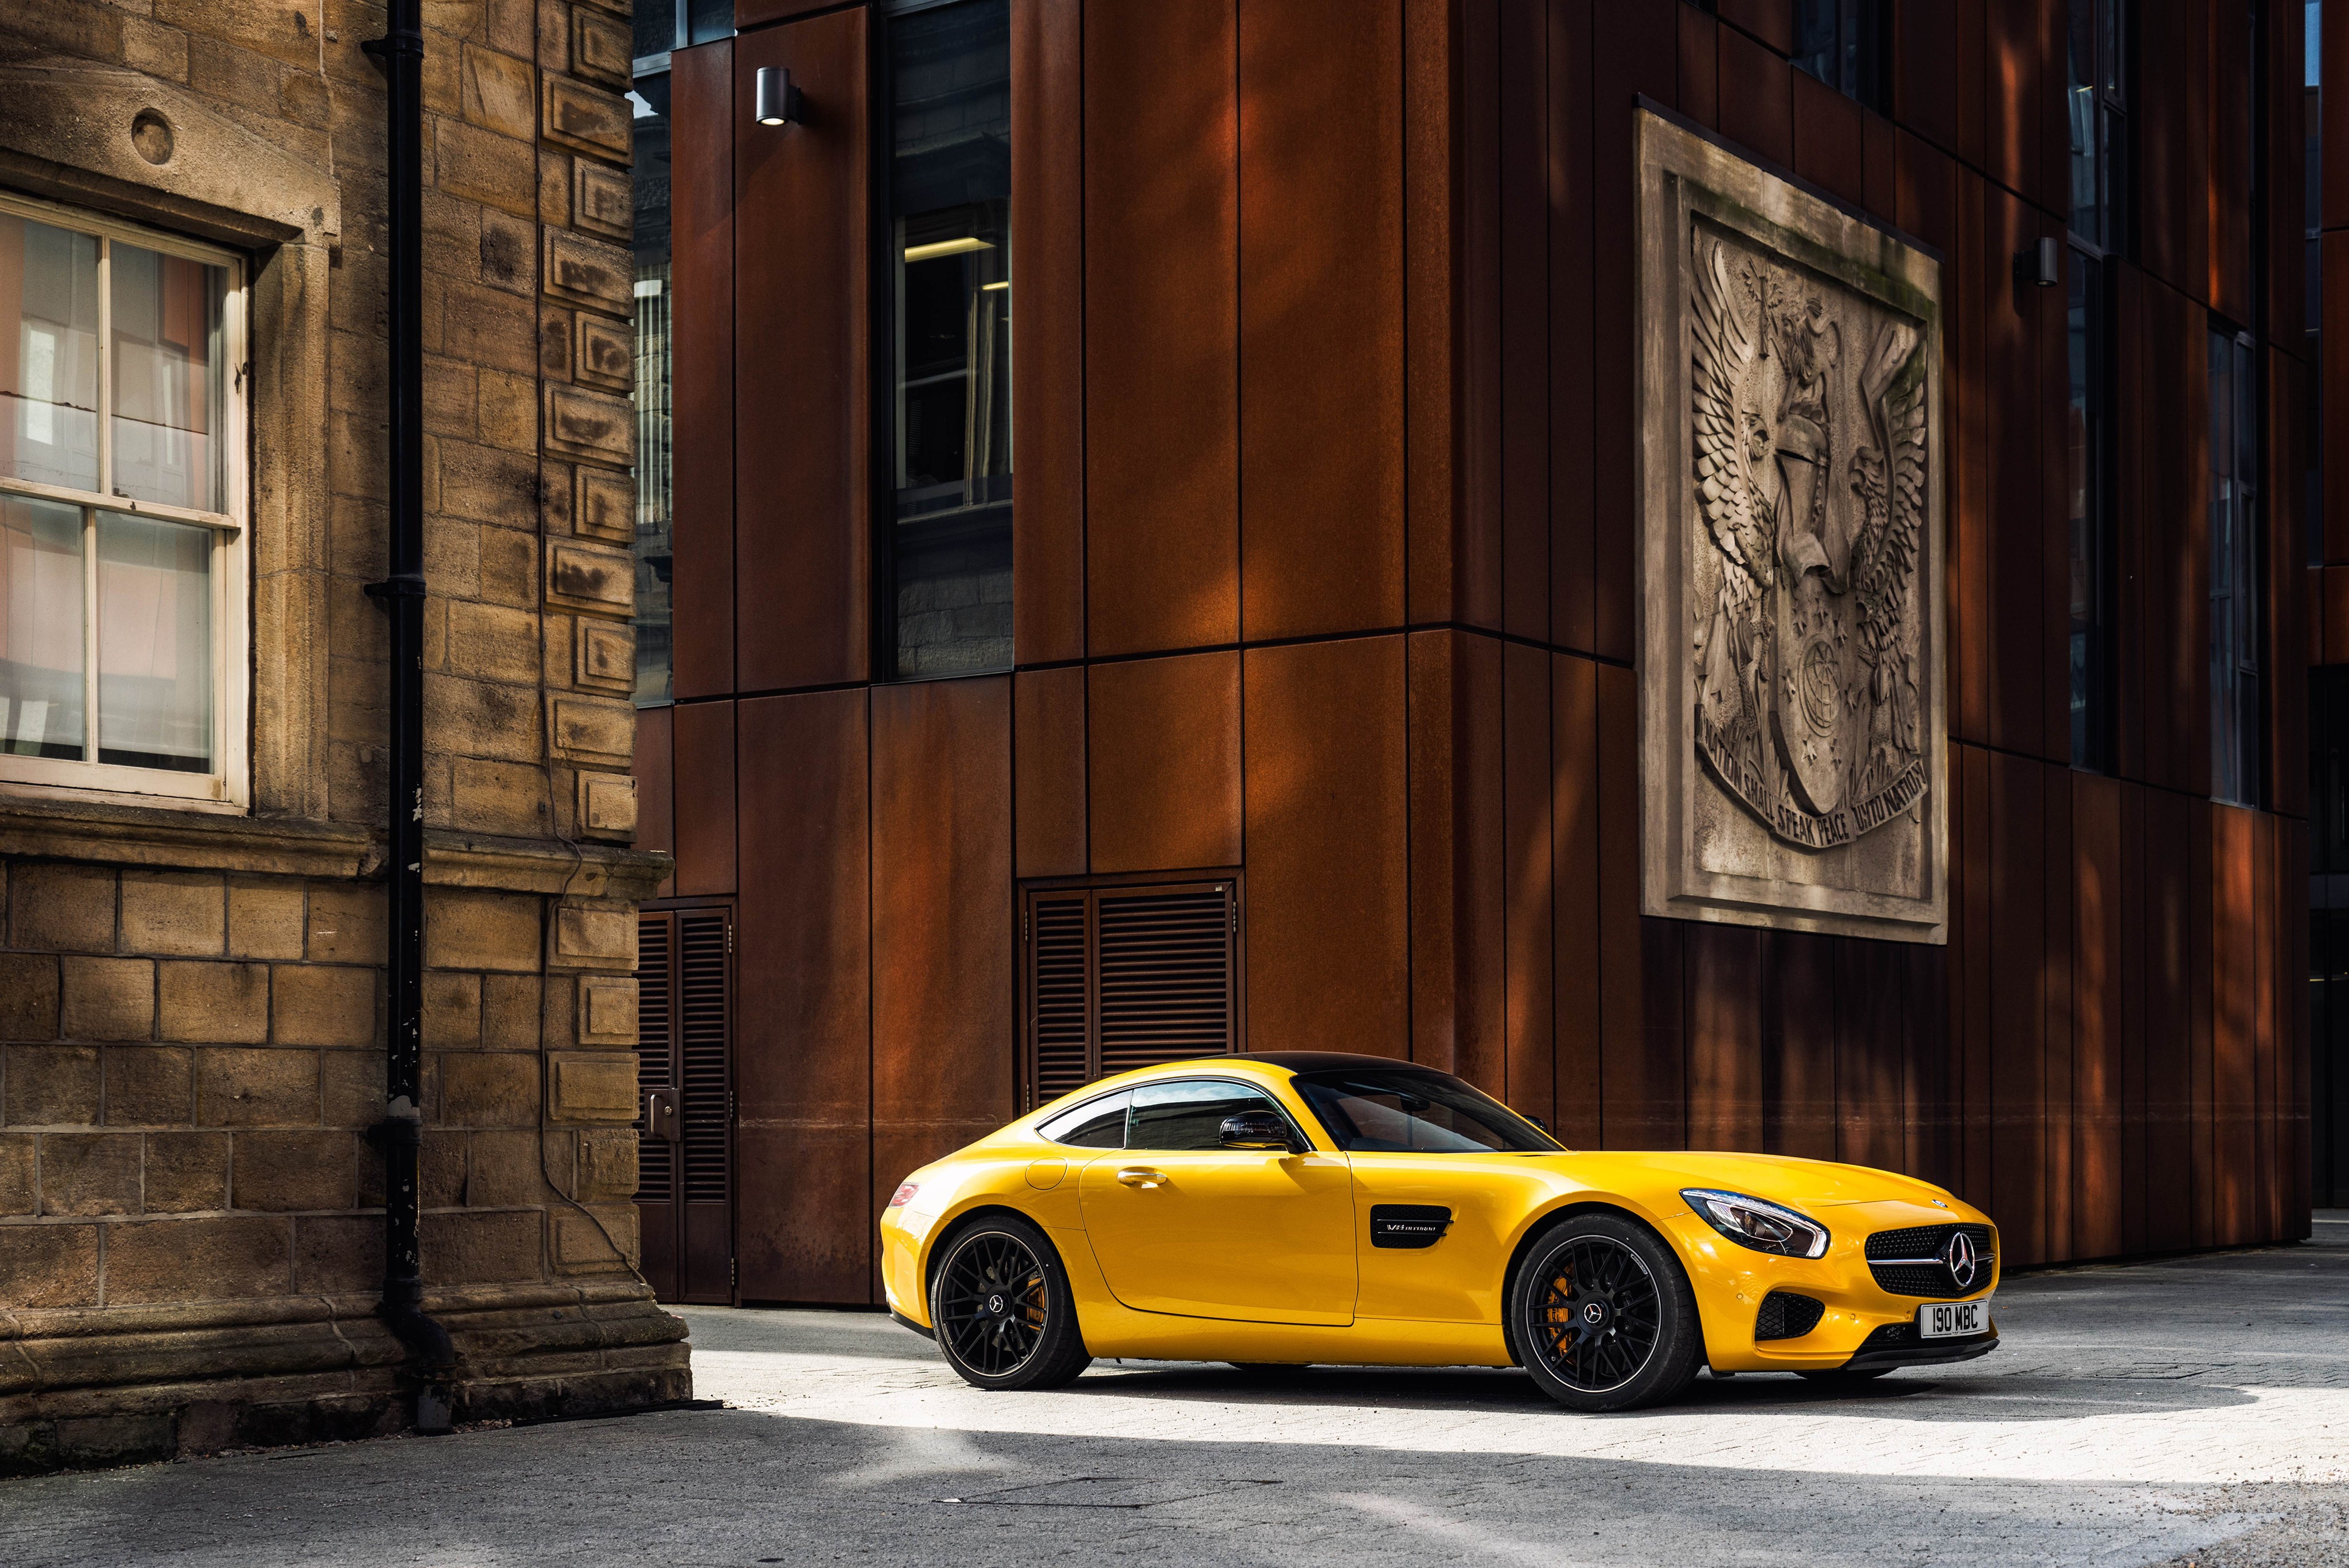 General 4096x2734 car Mercedes-AMG GT vehicle yellow cars yellow brown sunlight Mercedes-Benz building old building German cars coupe